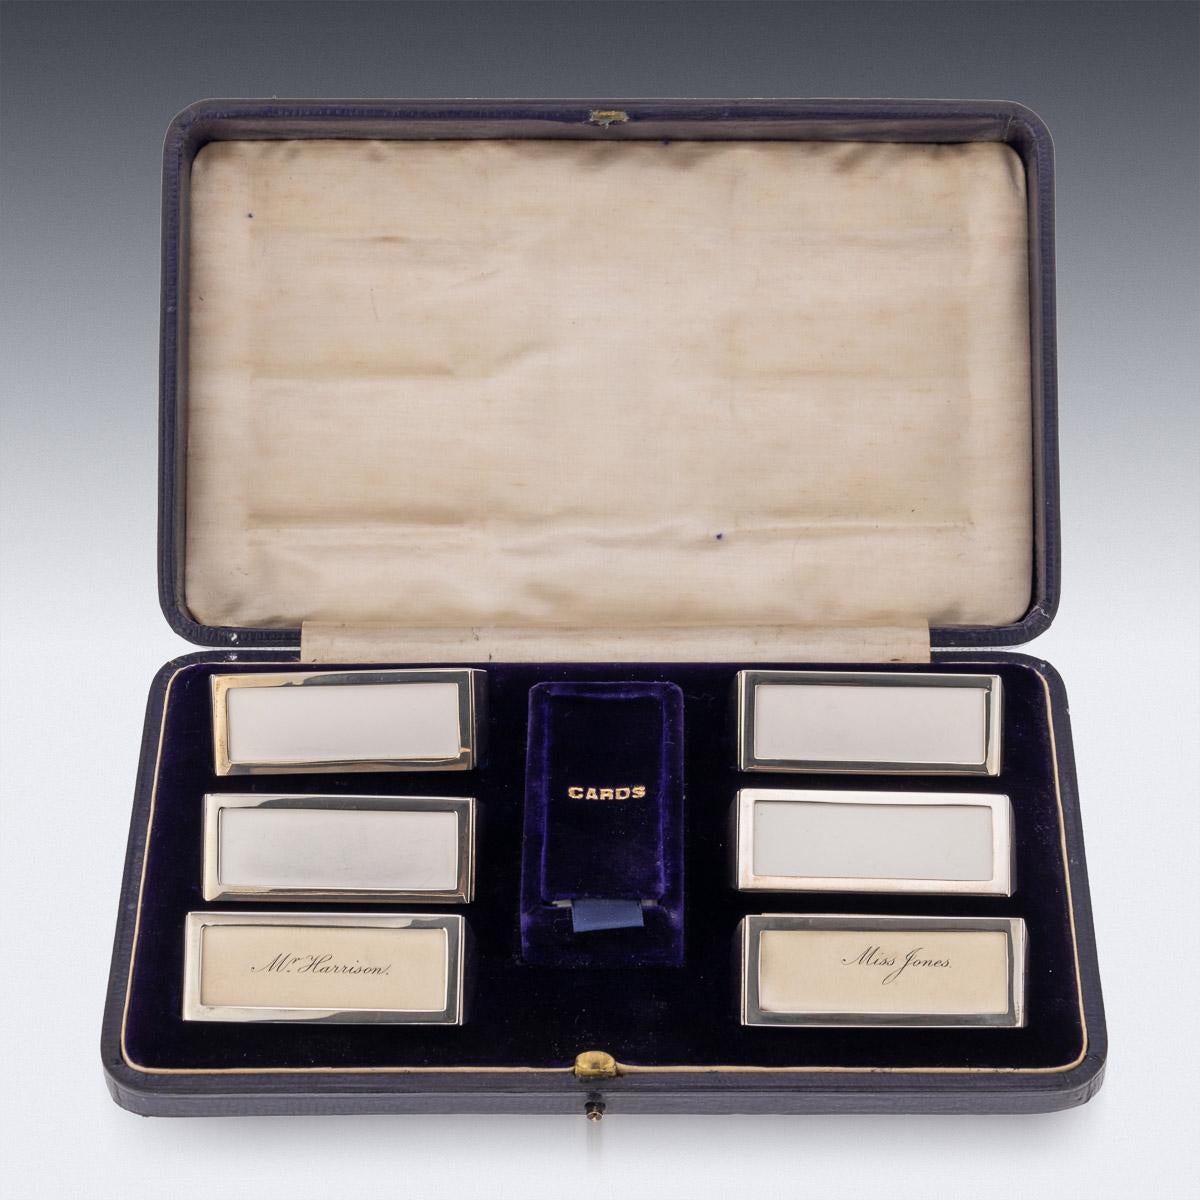 20th century Edwardian silver cased set of six napkin ring place holders. The set comes in its original leather bound case, each holder with a removable card.
Hallmarked English silver (925 Standard), Chester, year 1908 (H), Maker's mark SM&CO